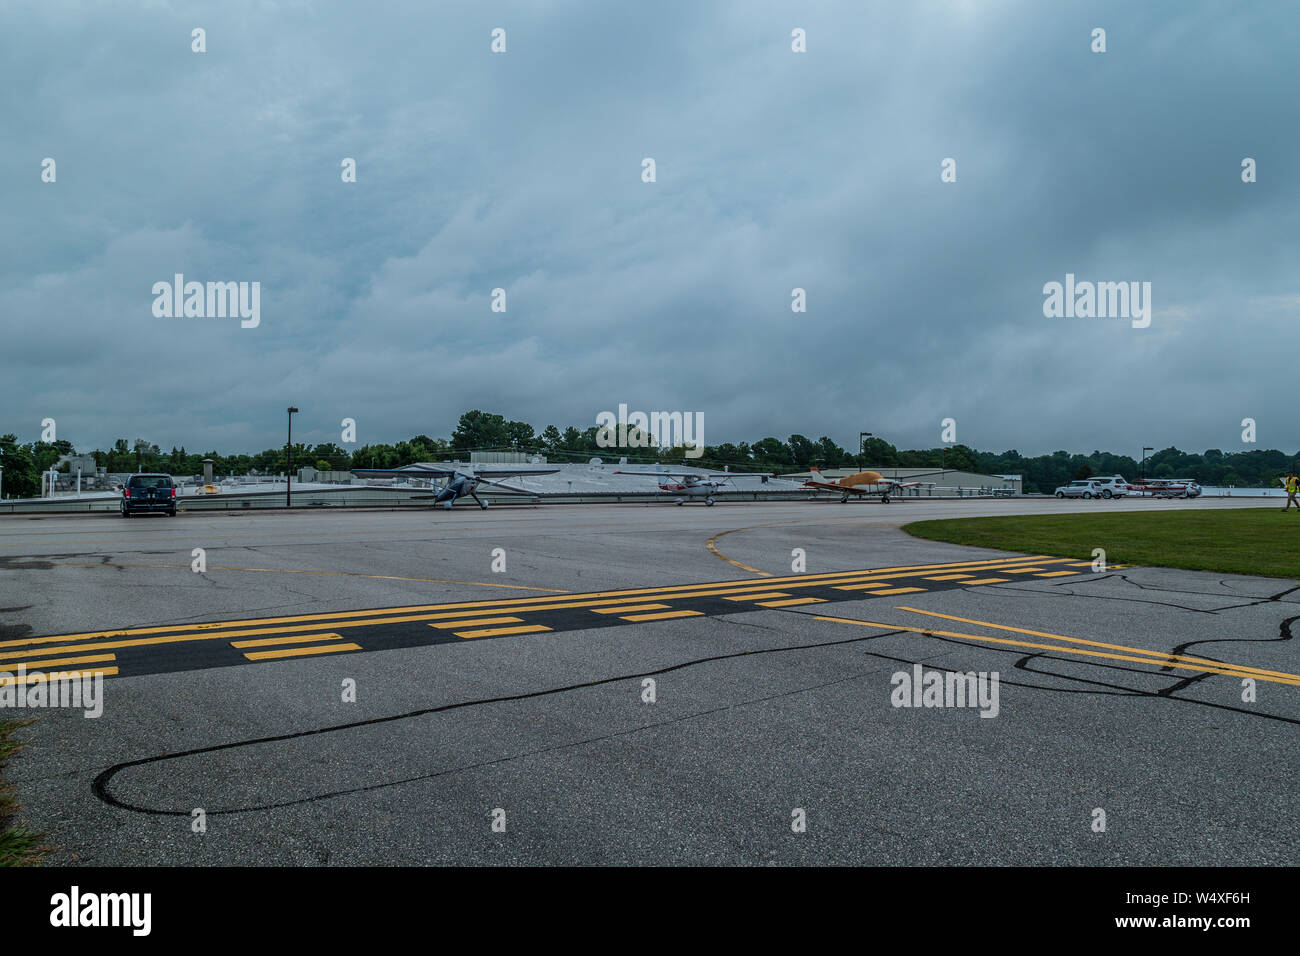 Small aircraft parked near the runway in the background at a very small airport on a cloudy day in summer Stock Photo